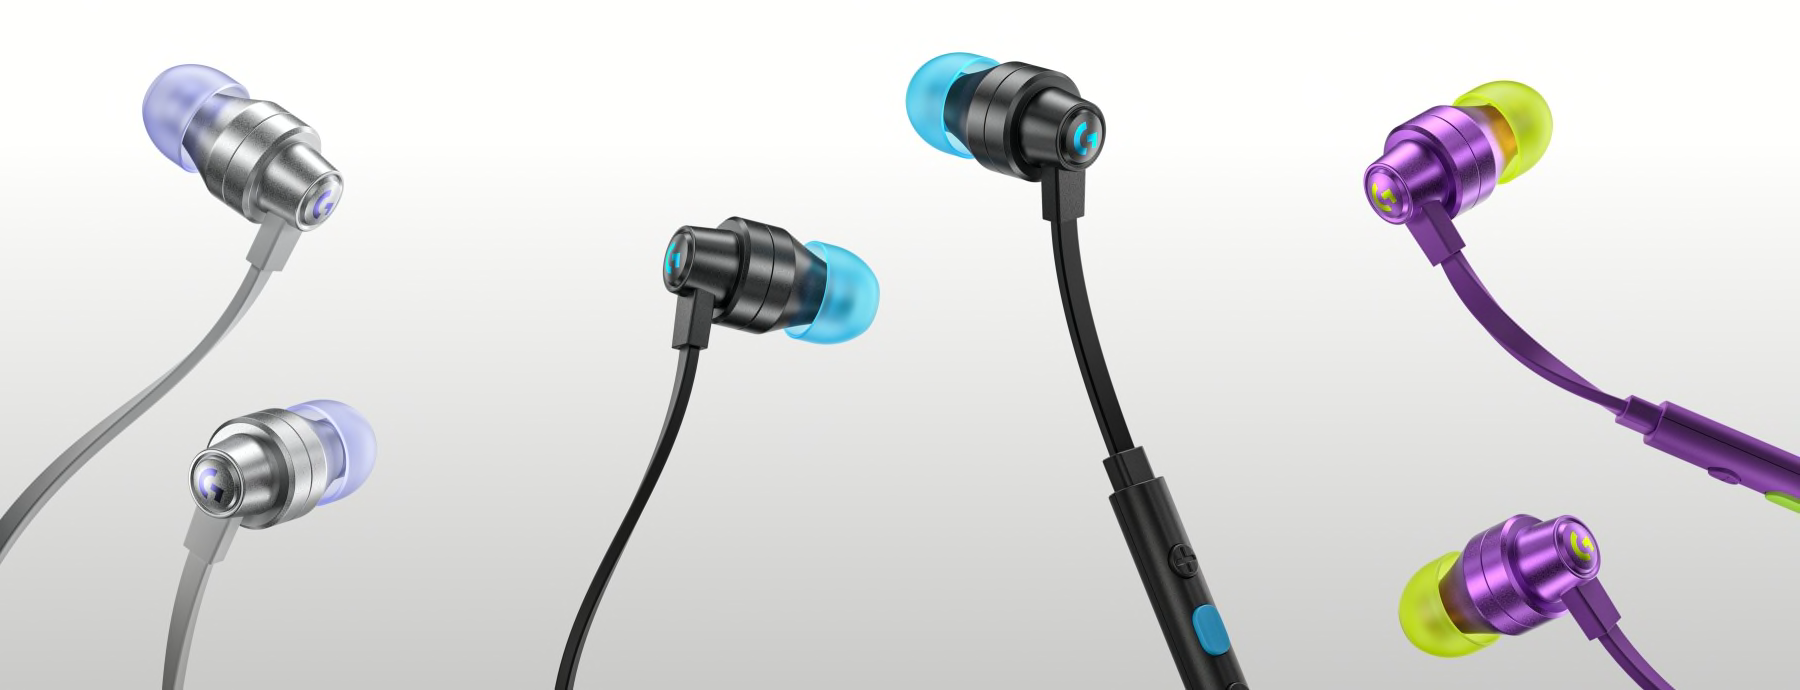 Logitech G333 Gaming Earphones with Mic and Dual Drivers